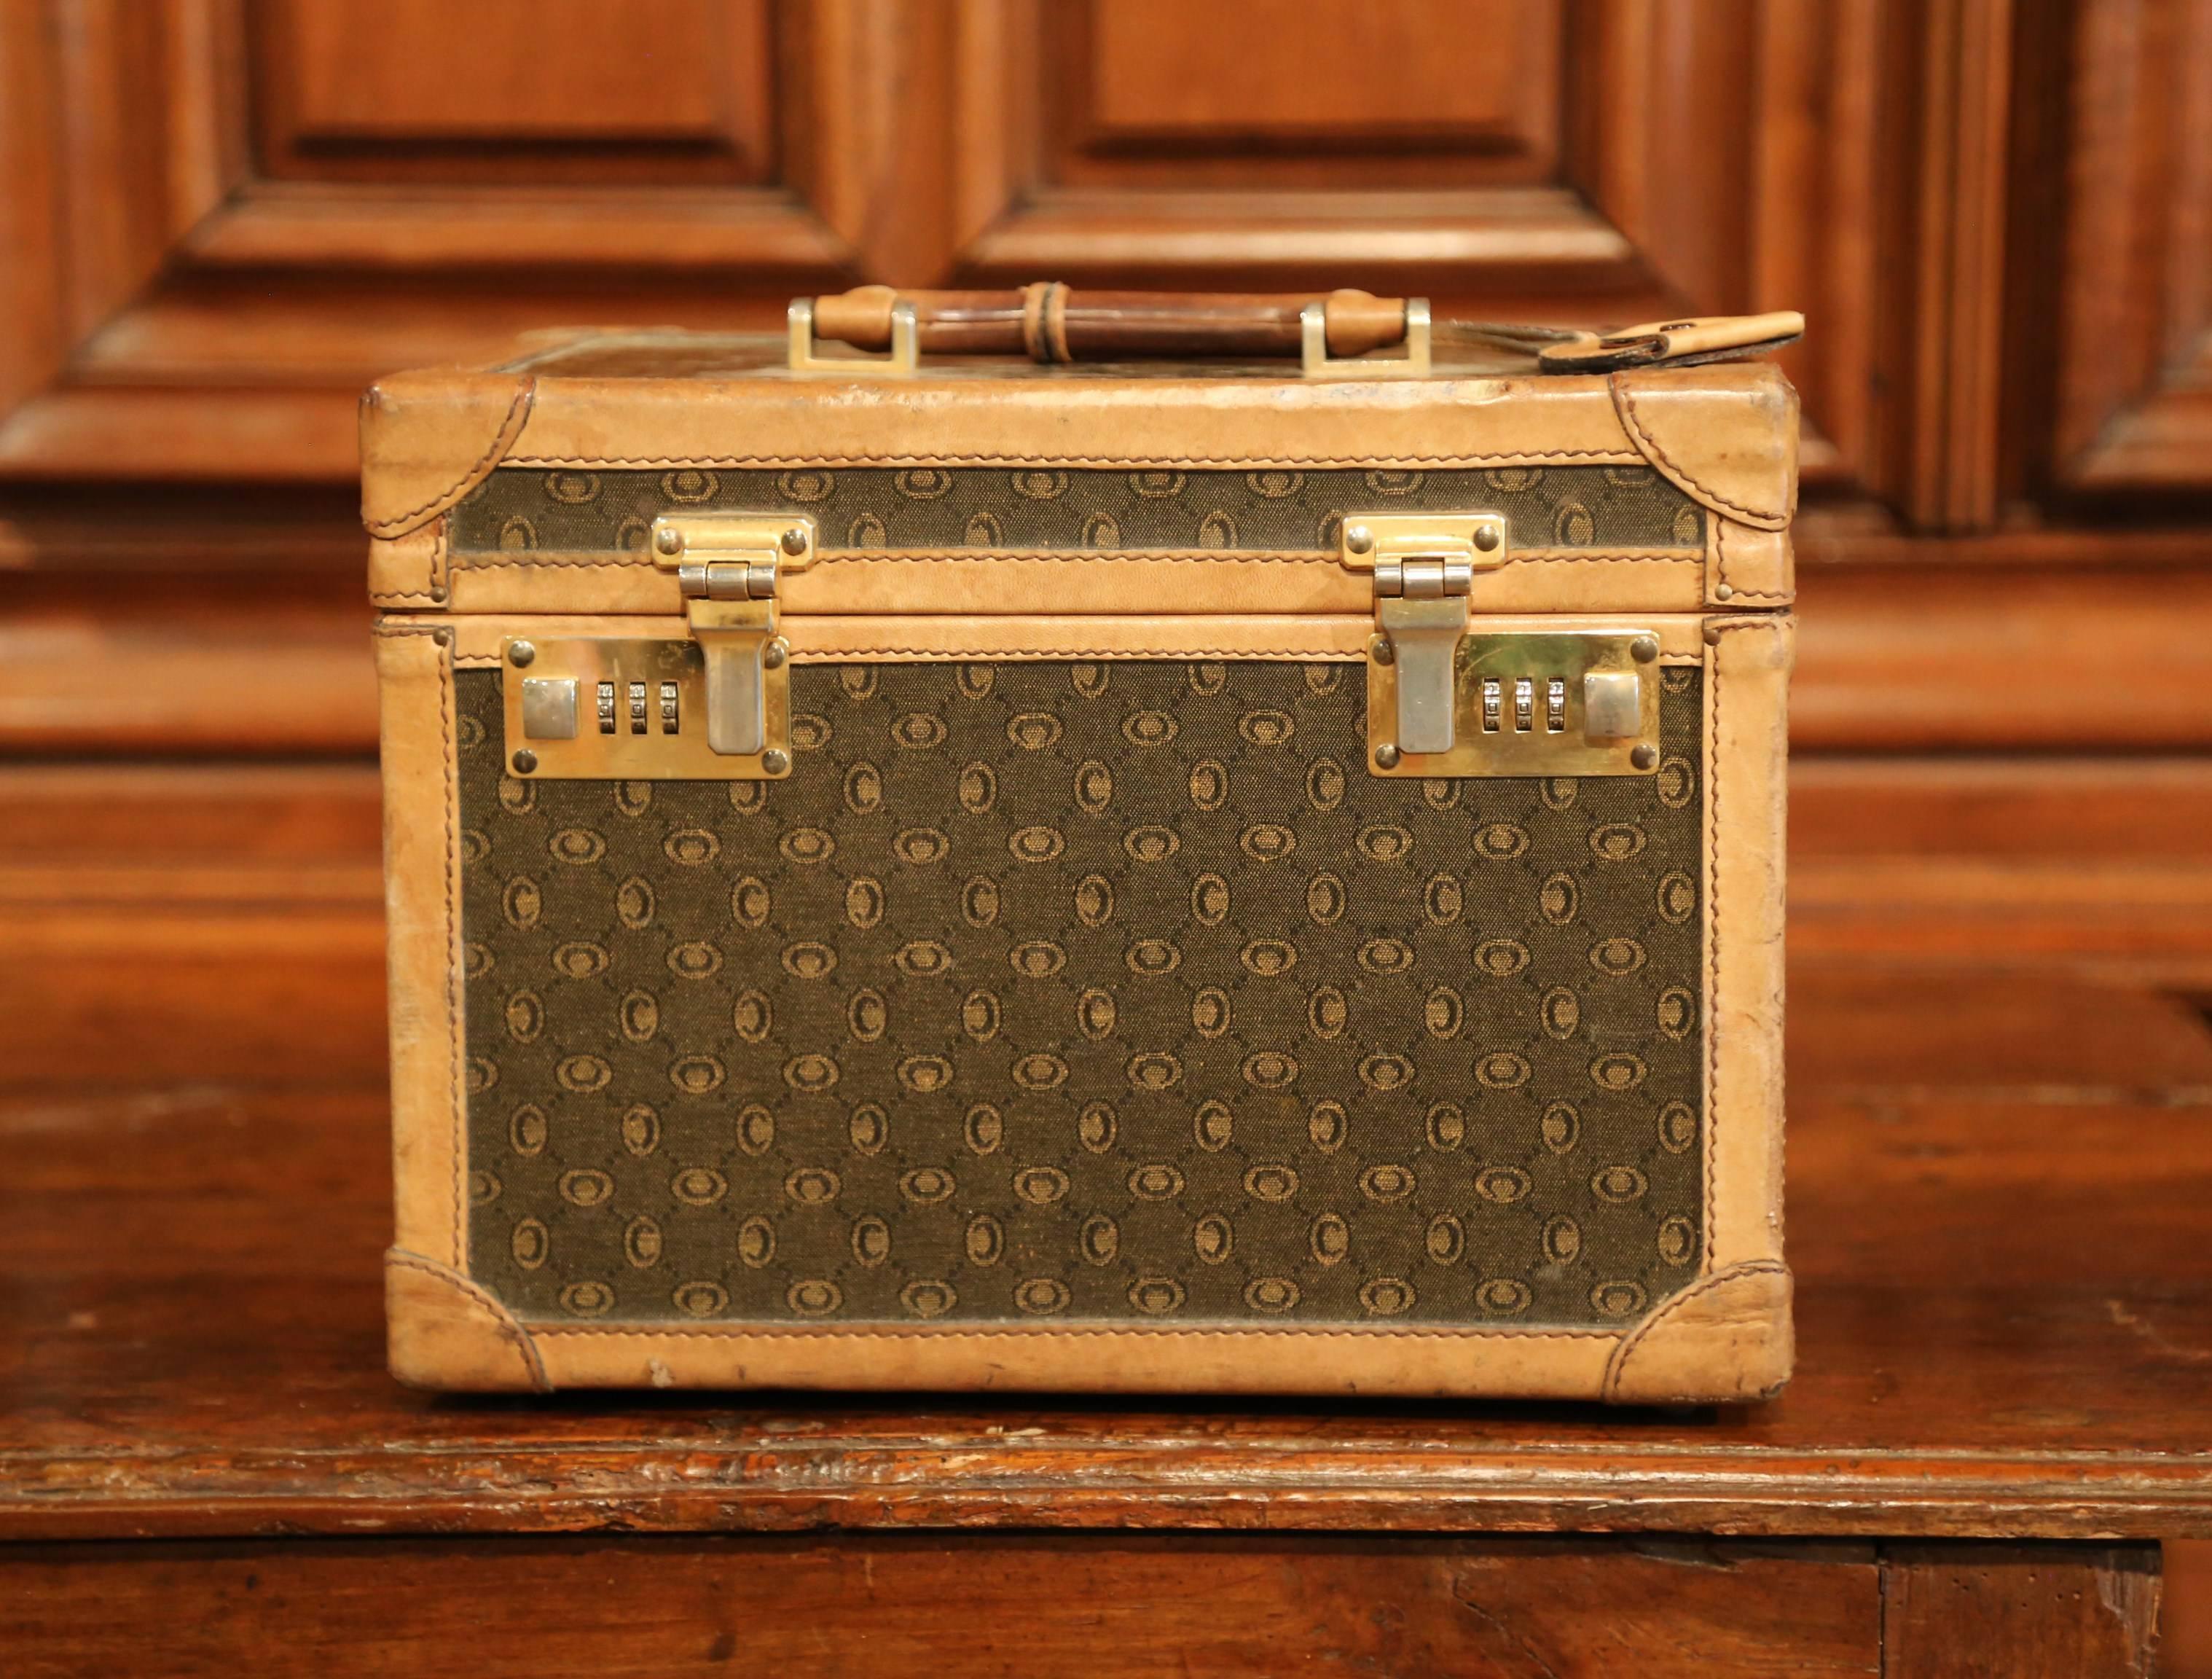 Hand-Crafted 19th Century French Leather Toiletry Box with Decorative Trim and Brass Hardware